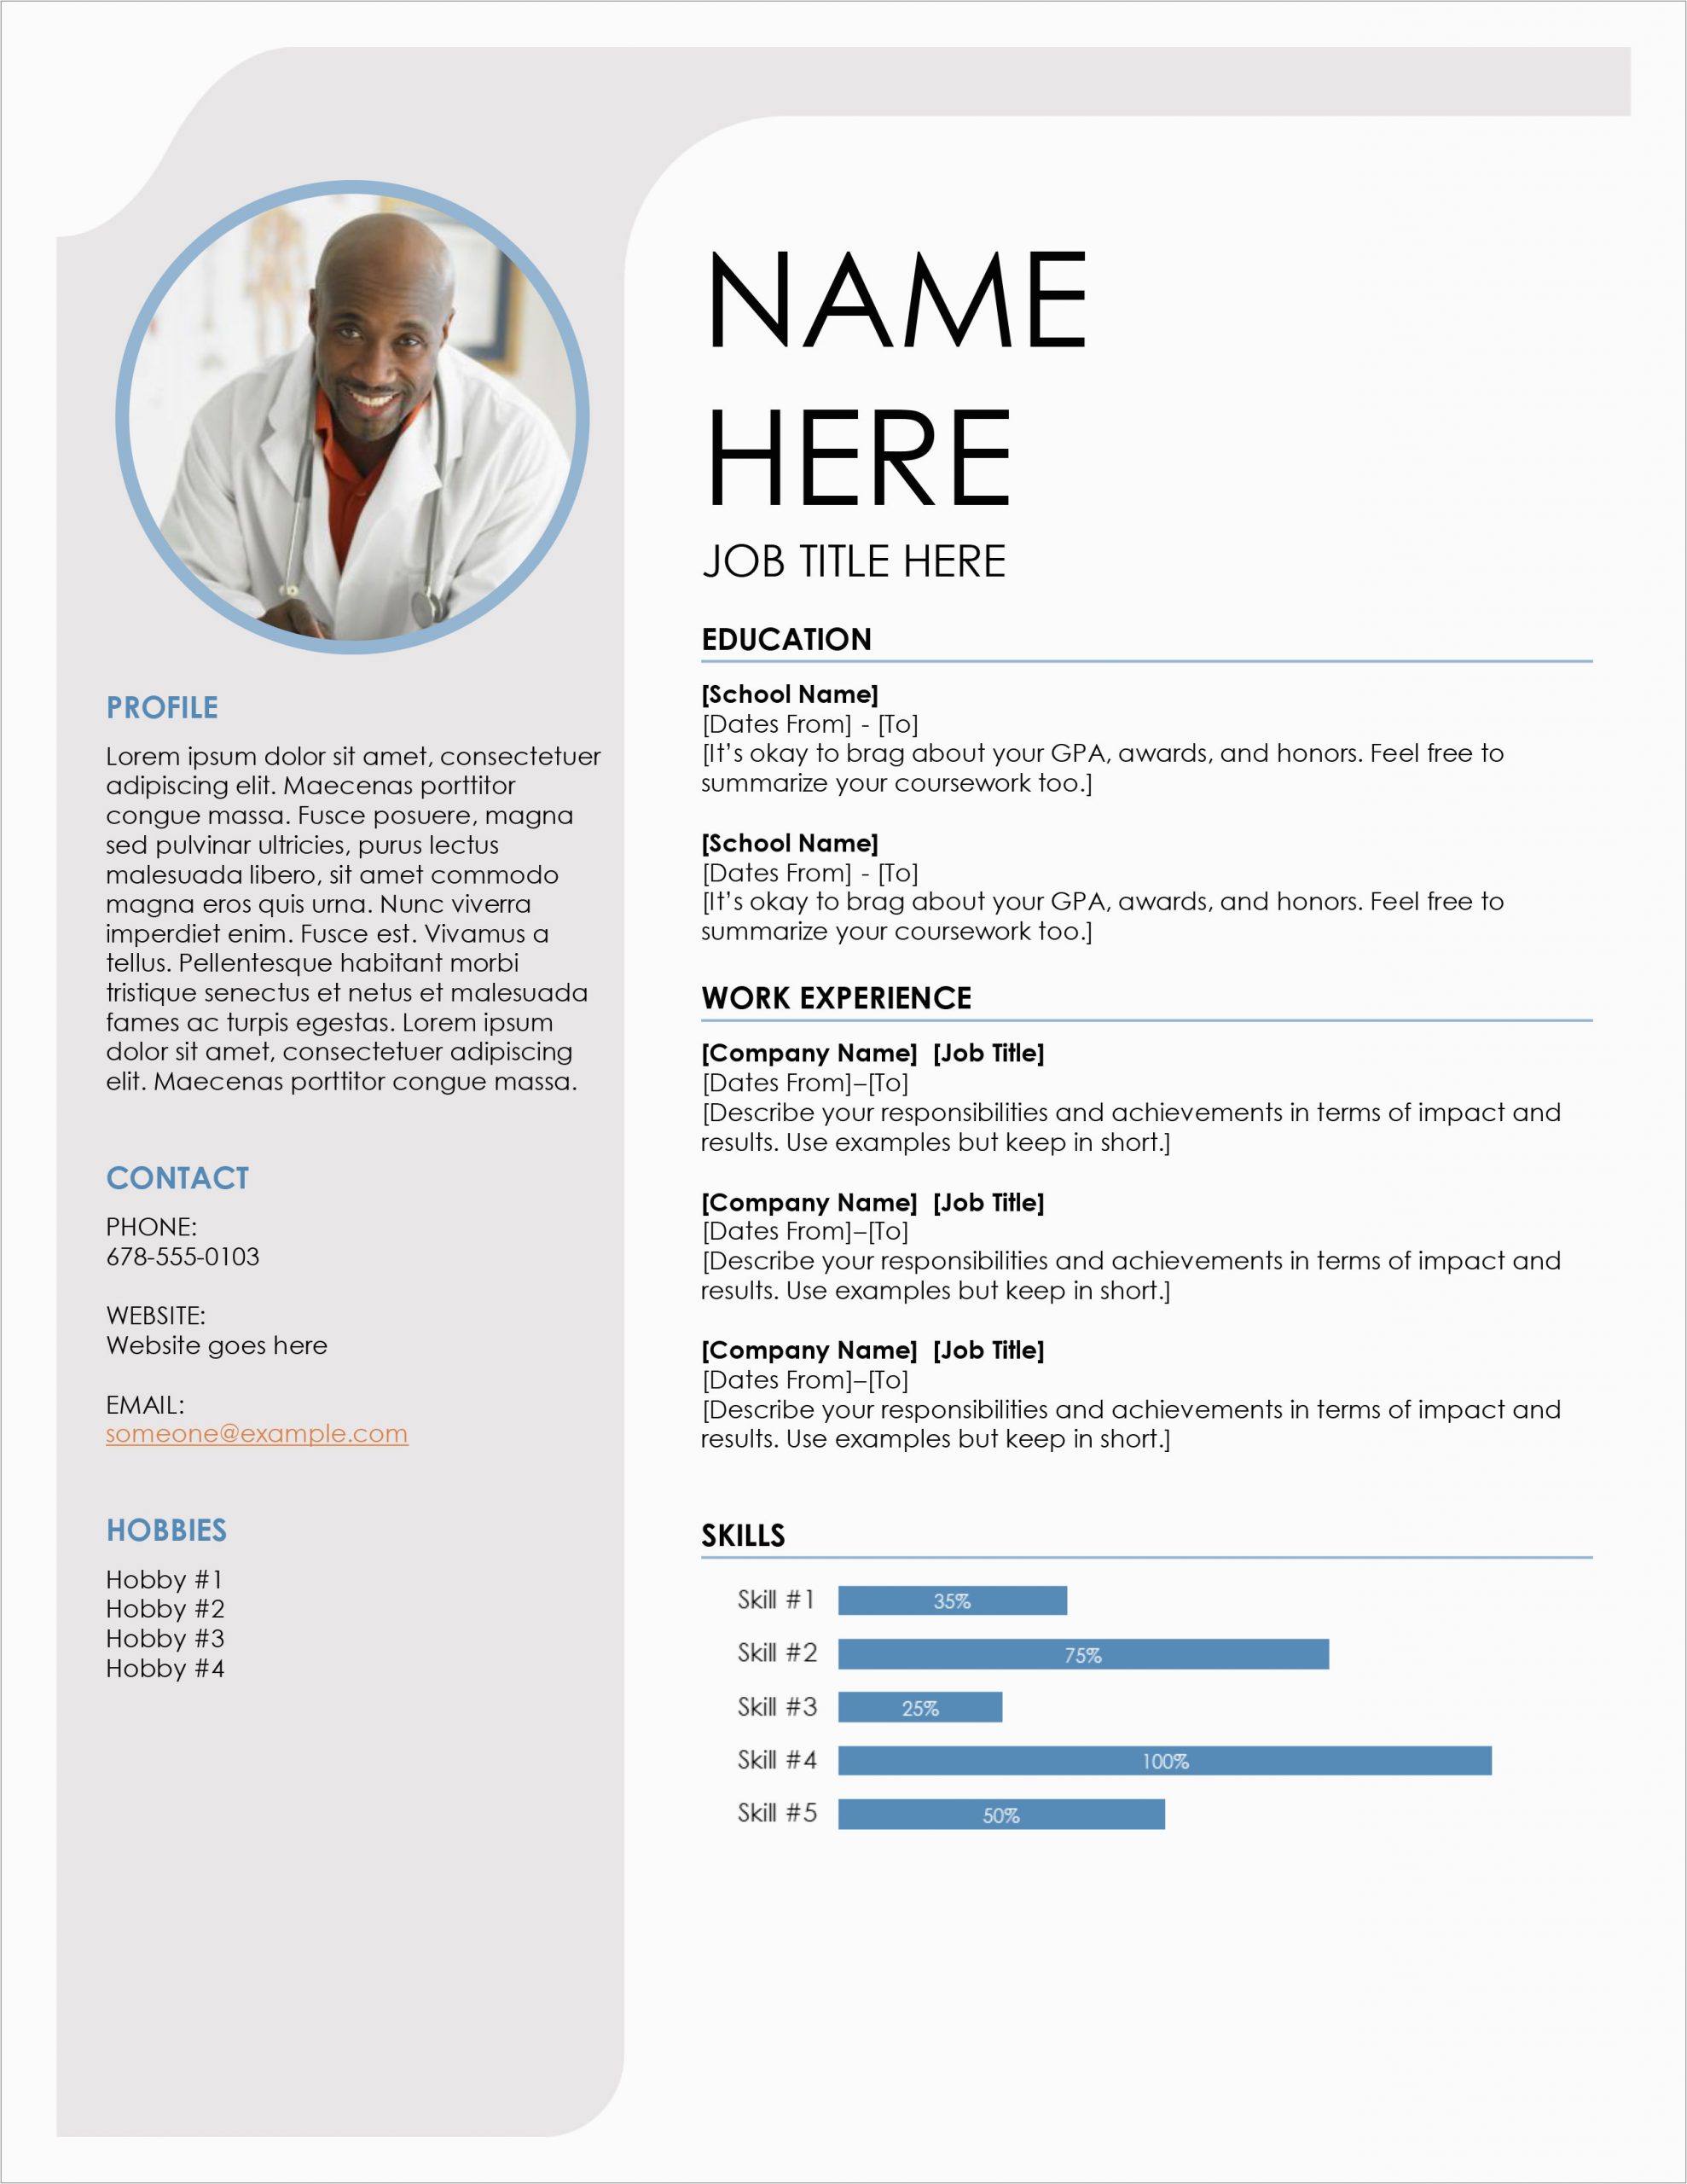 Resume and Cv Templates Free Download Word Document Resume Template Free 50 Resume Templates